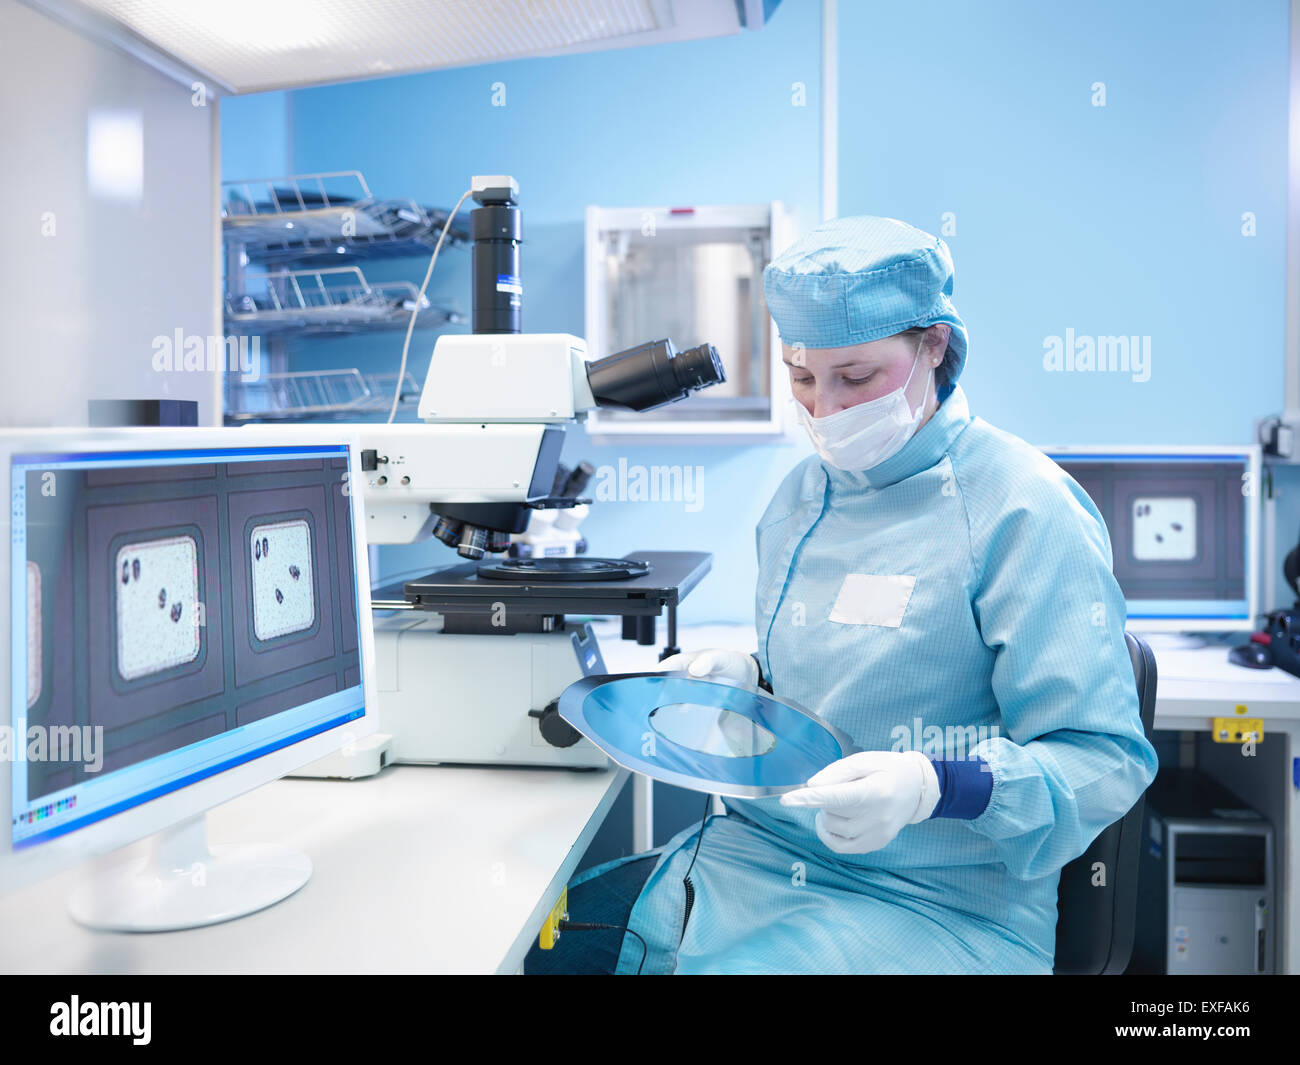 Electronics worker in clean room with silicon wafer Stock Photo